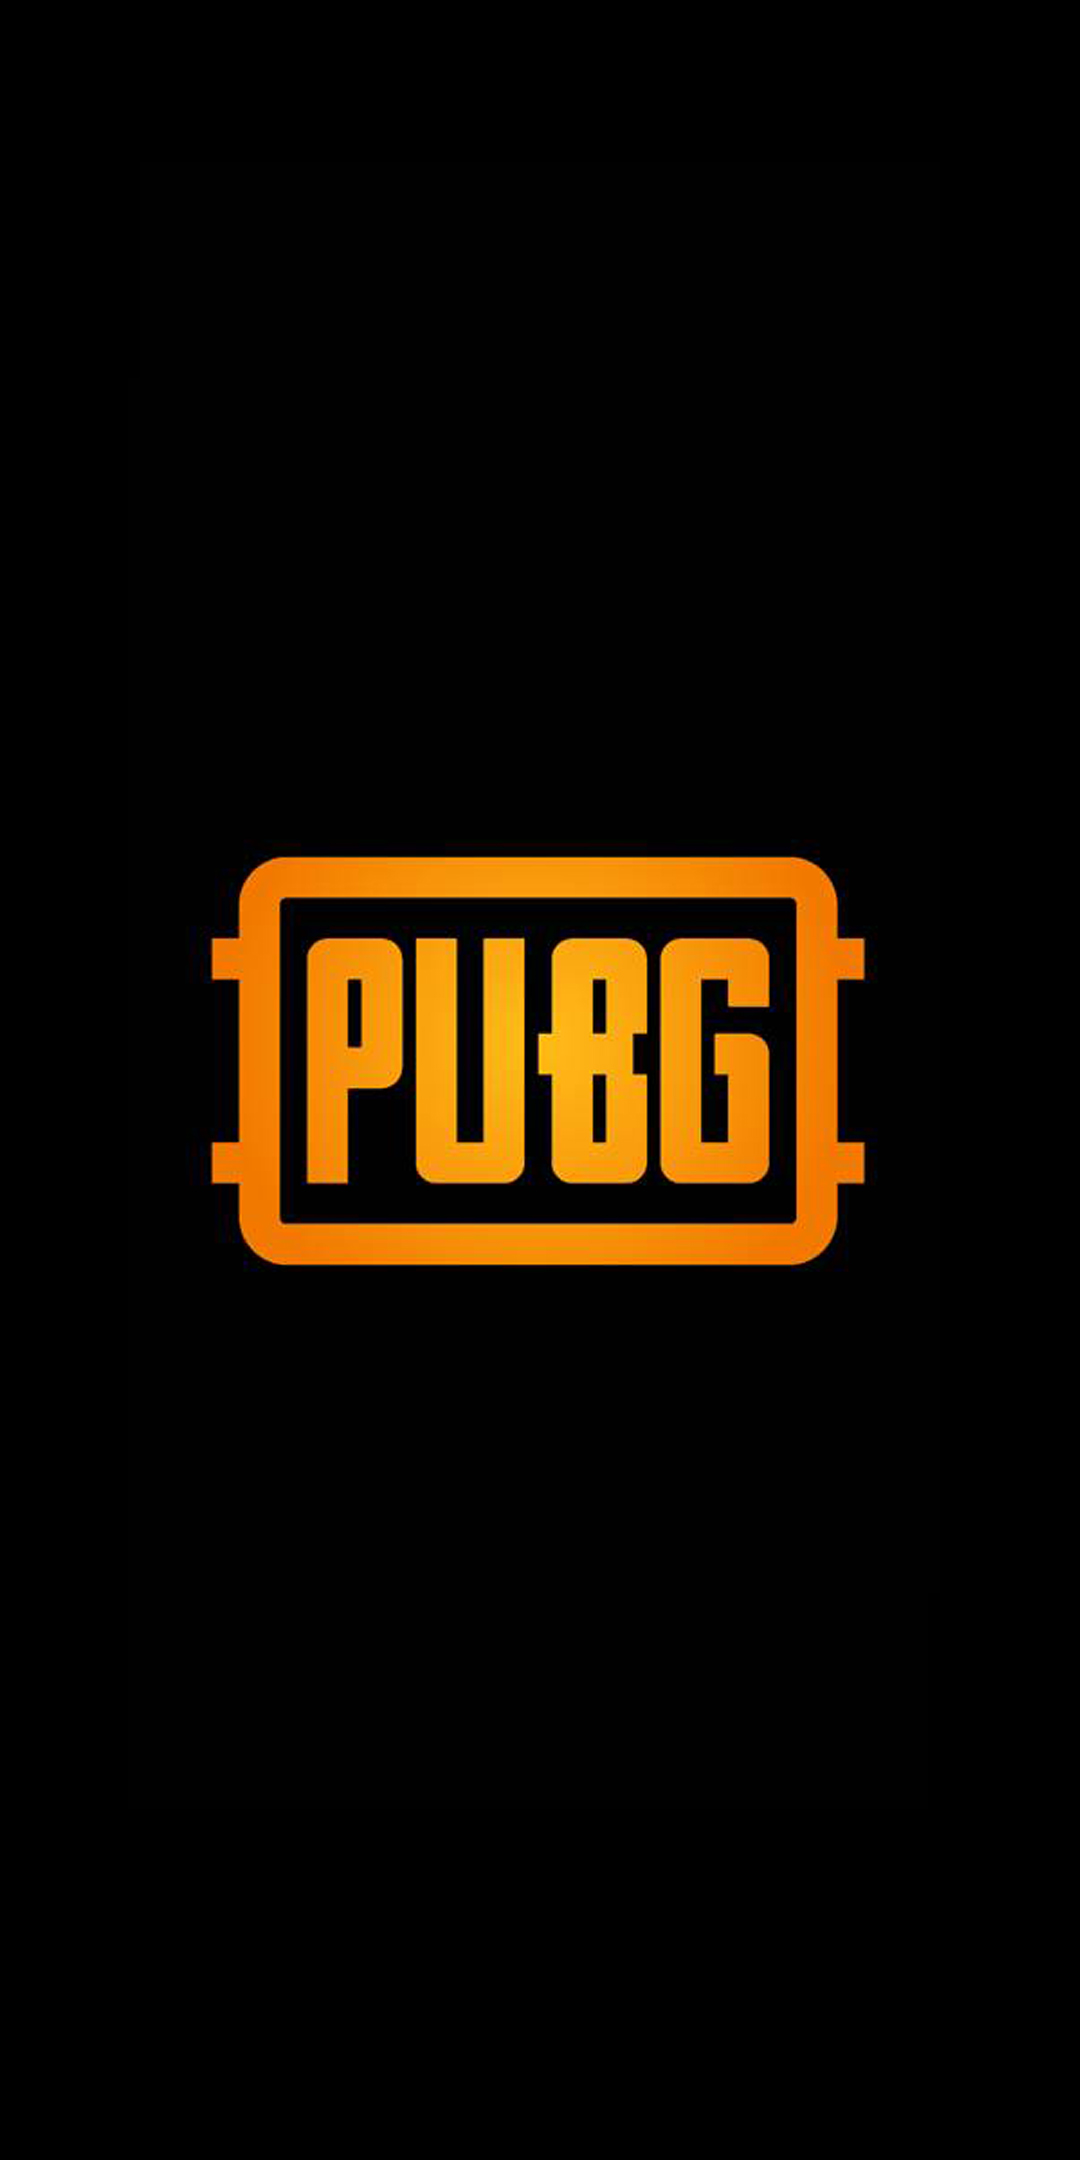 40 PUBG Wallpapers for Phones FHD 189 Wallpapers DroidViews